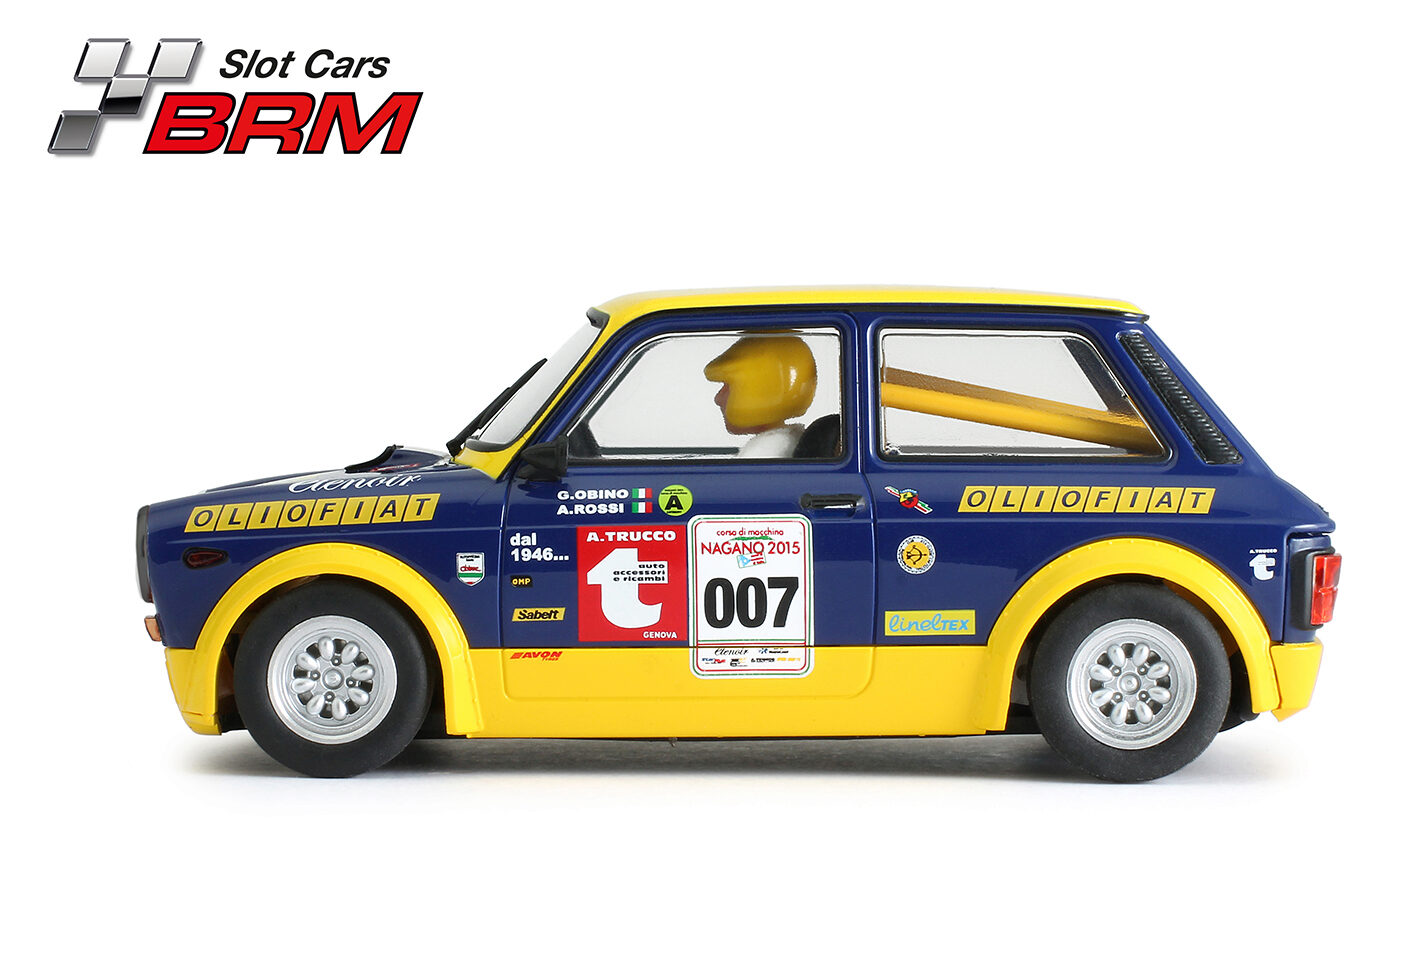 BRM MODEL CARS BRM132 A112 ABARTH - OLIO FIAT #007 - NAGANO 2015 - assembled with aluminum chassis - CAMBER system